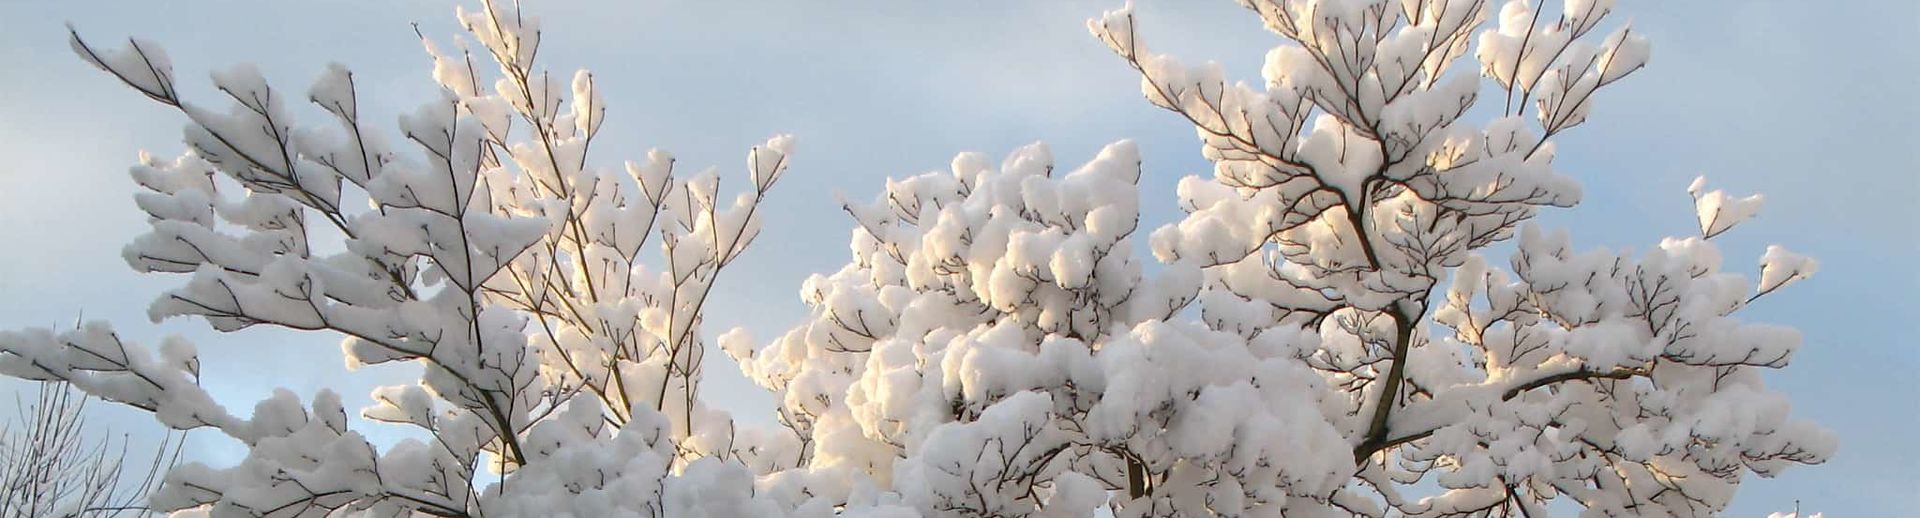 Snow-covered tree backlit by sunshine